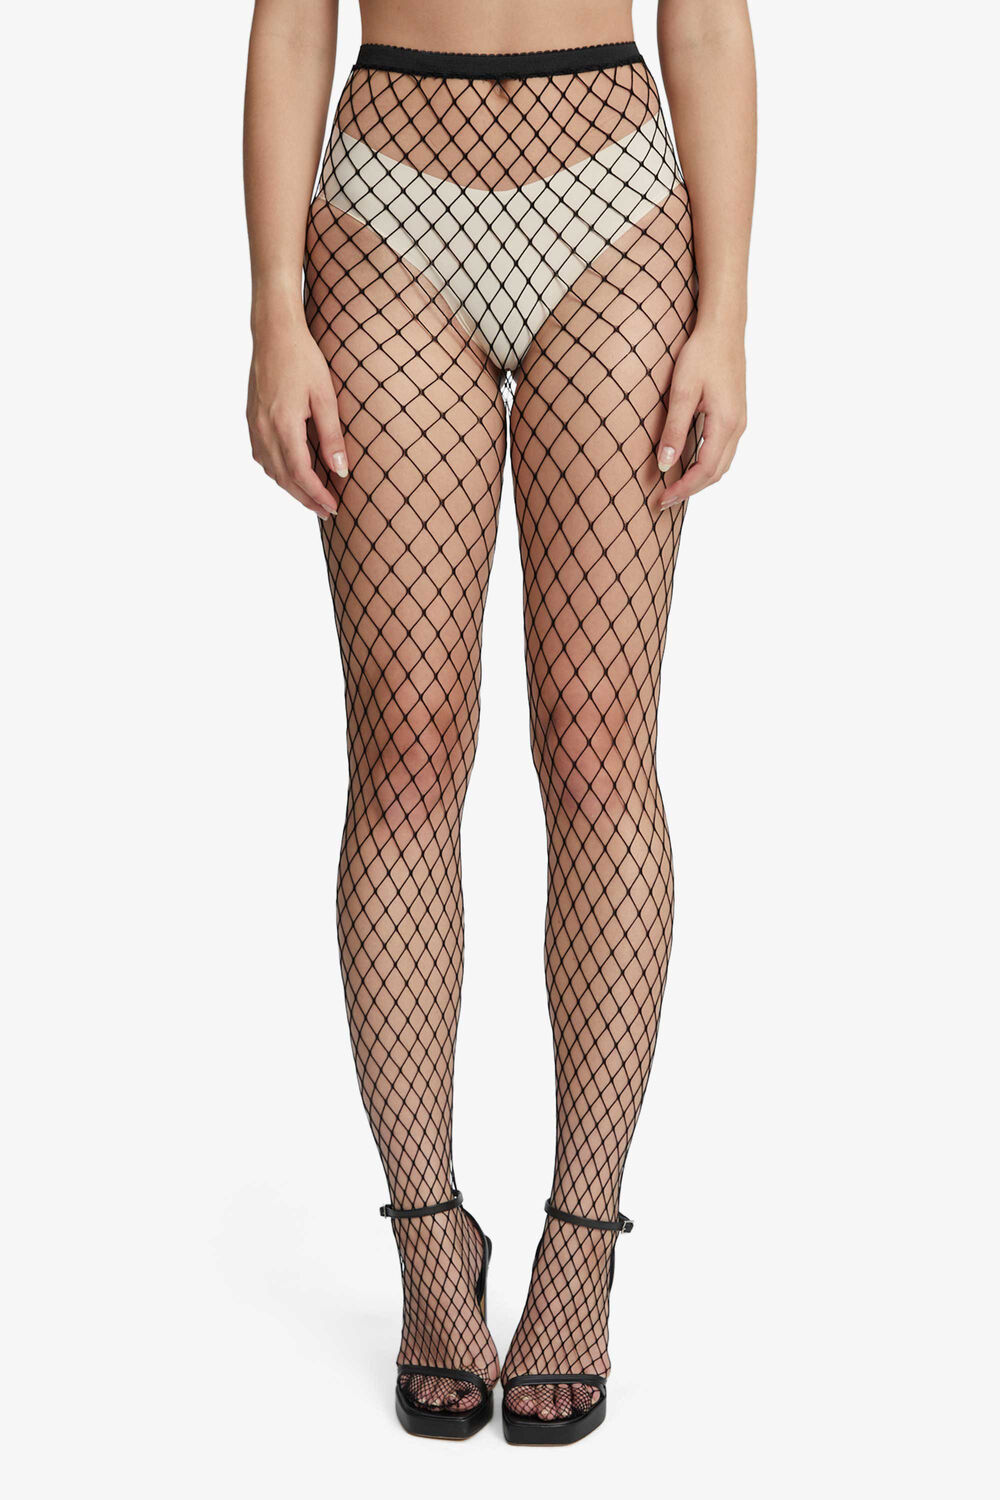 FISHNET TIGHTS in colour METEORITE